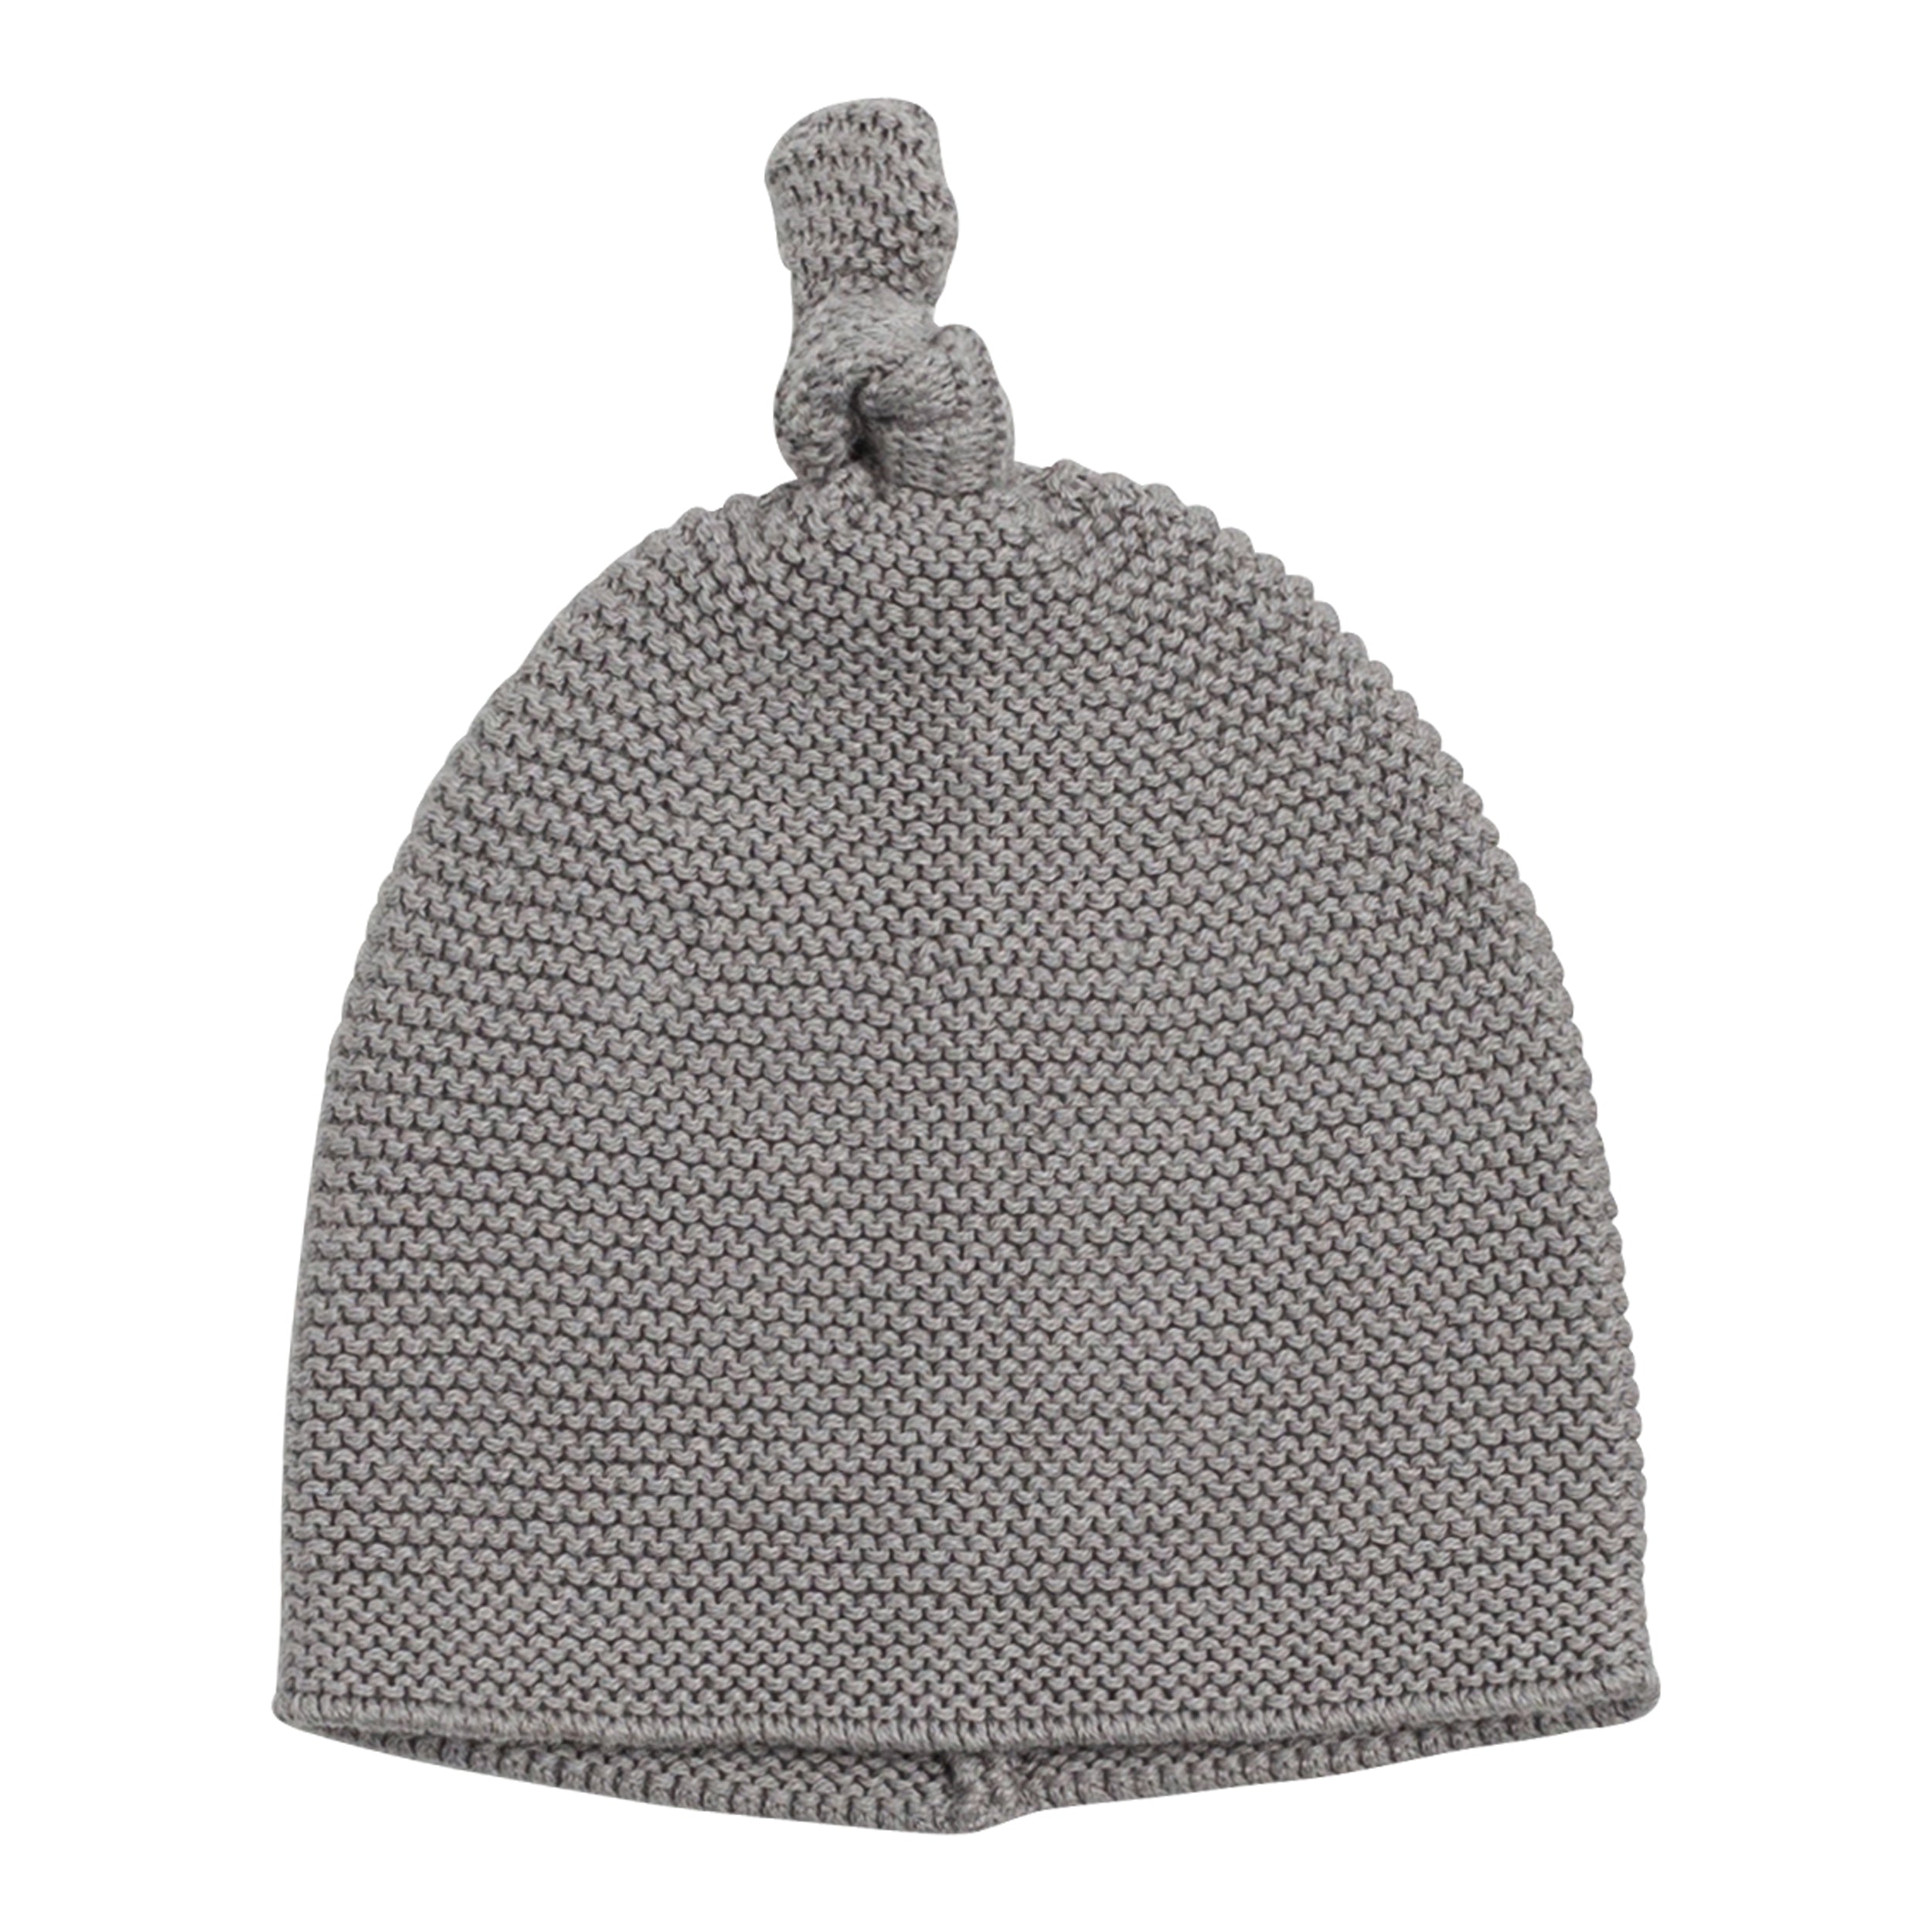 Cozy Top Knot Baby Hat - Gray